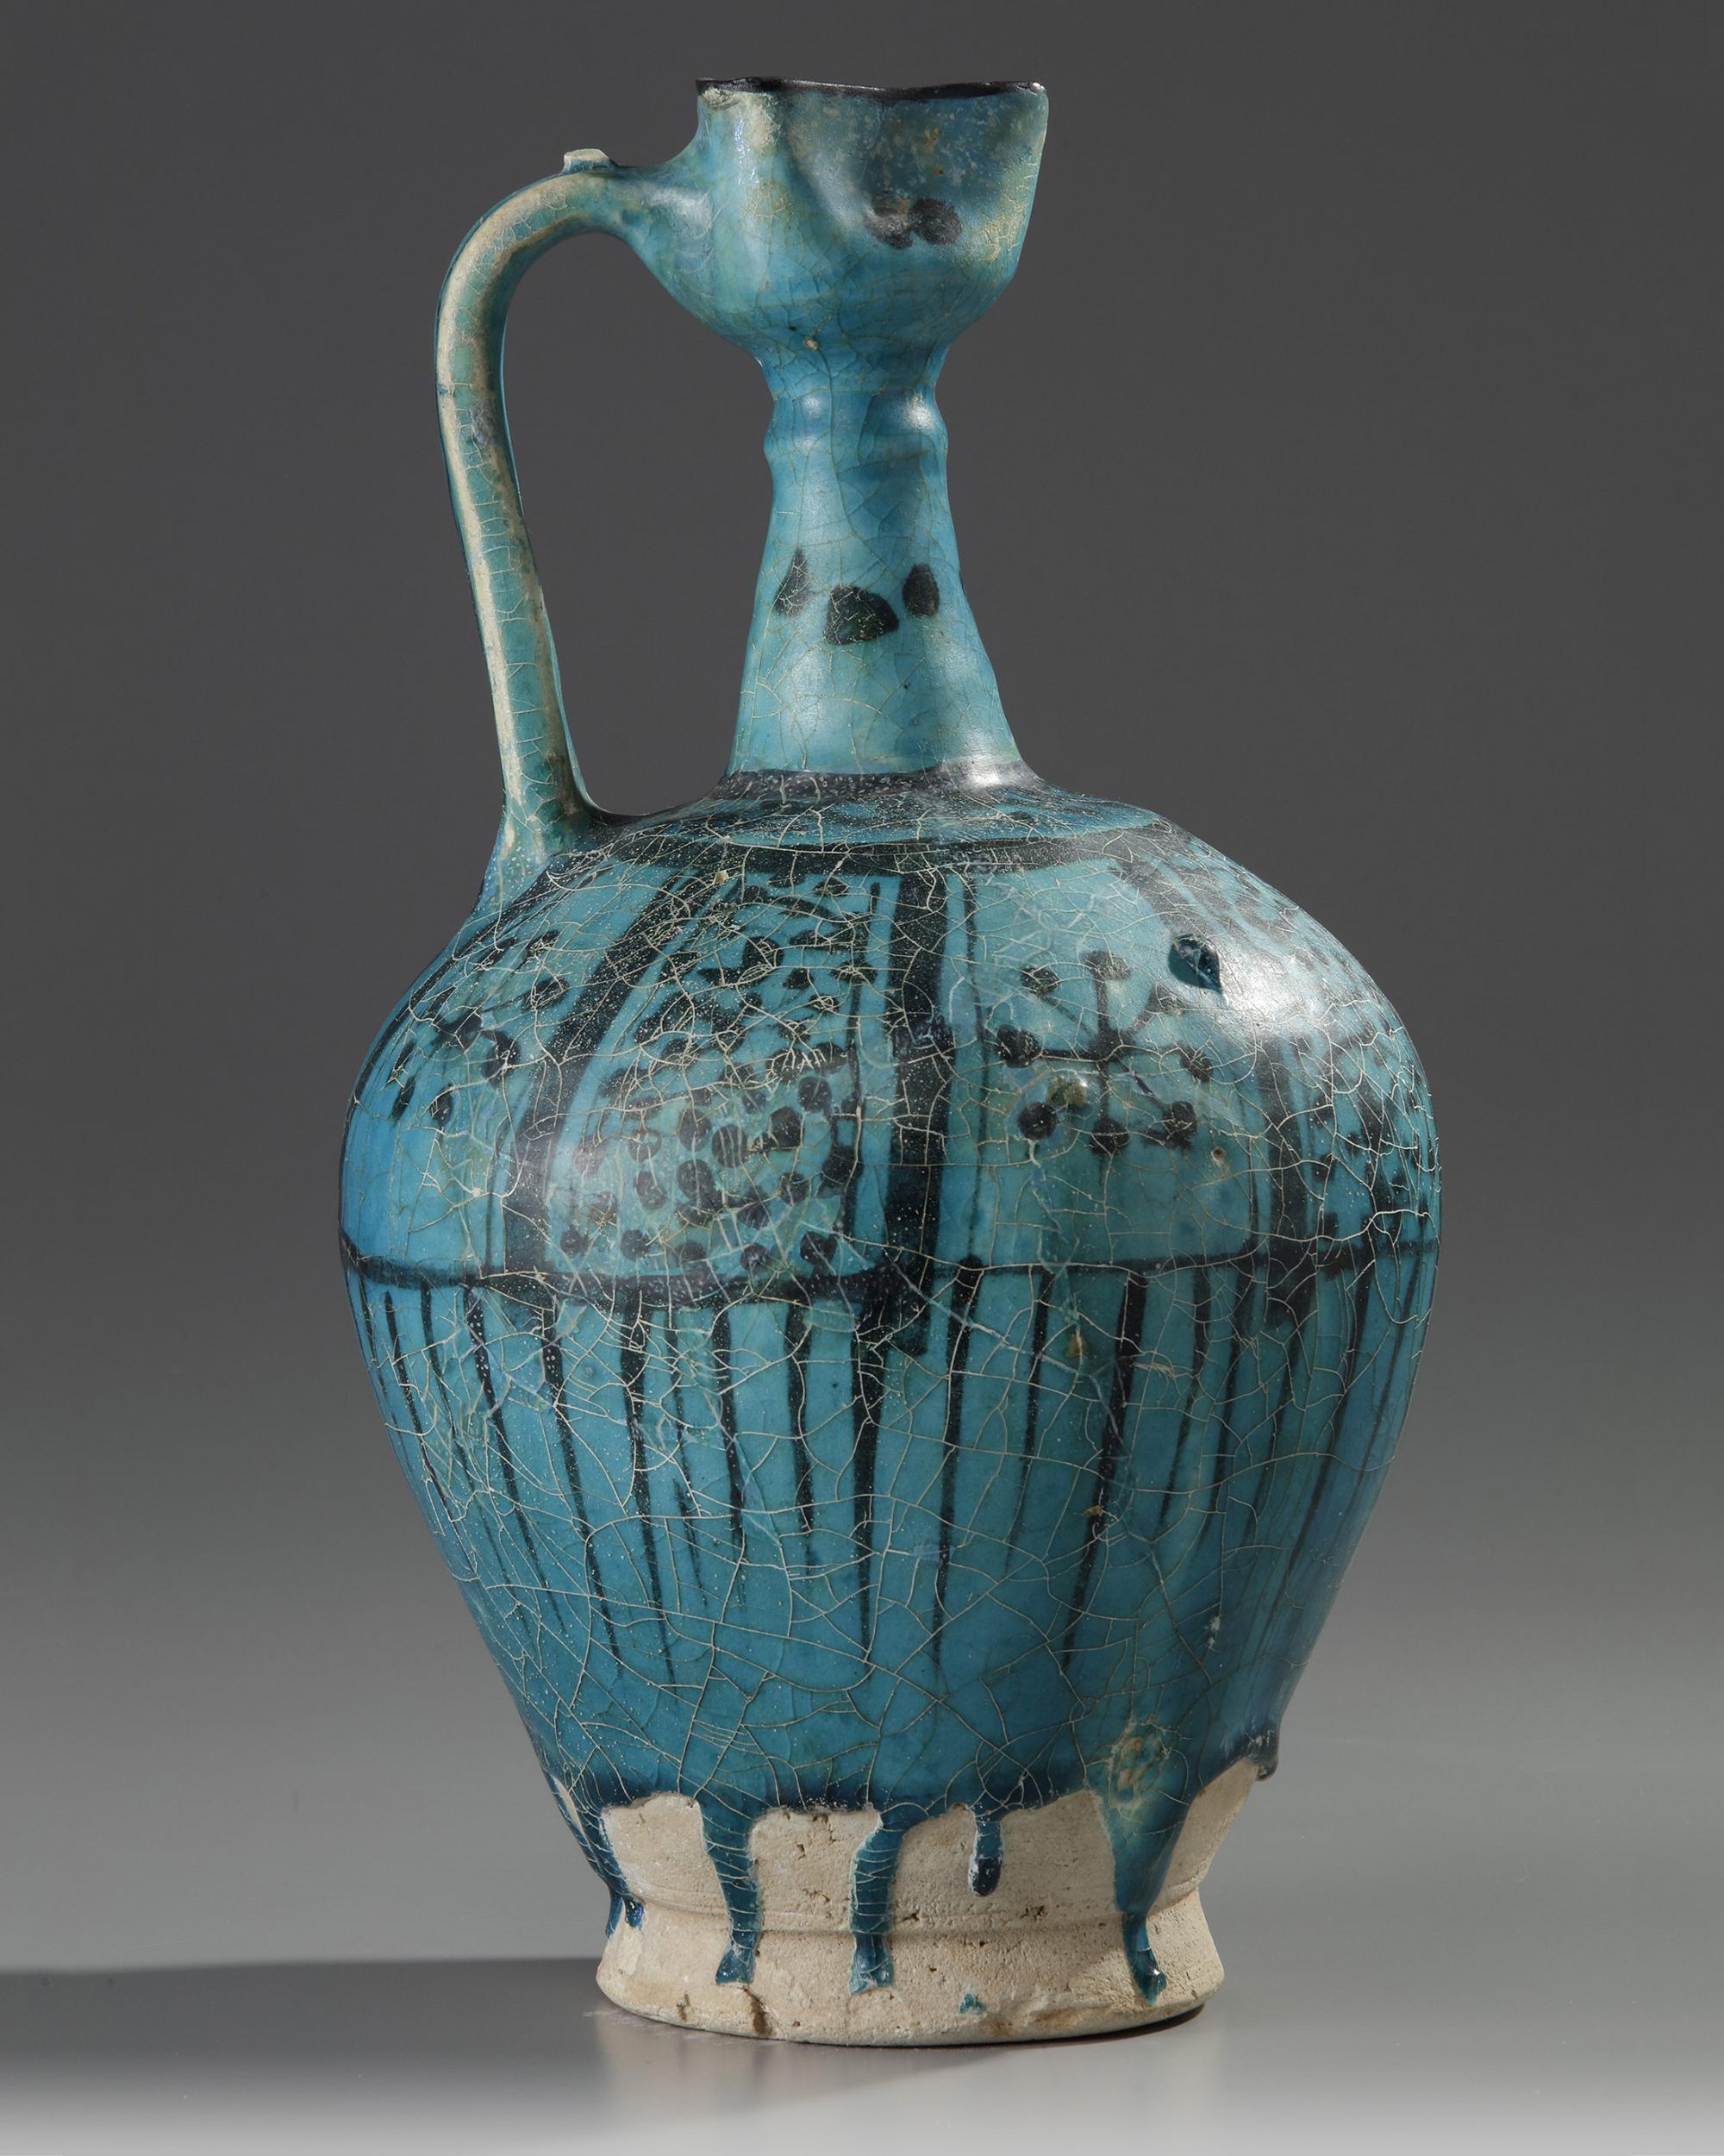 A LARGE RAQQA UNDERGLAZE PAINTED POTTERY EWER, SYRIA, 12TH-13TH CENTURY - Image 12 of 20